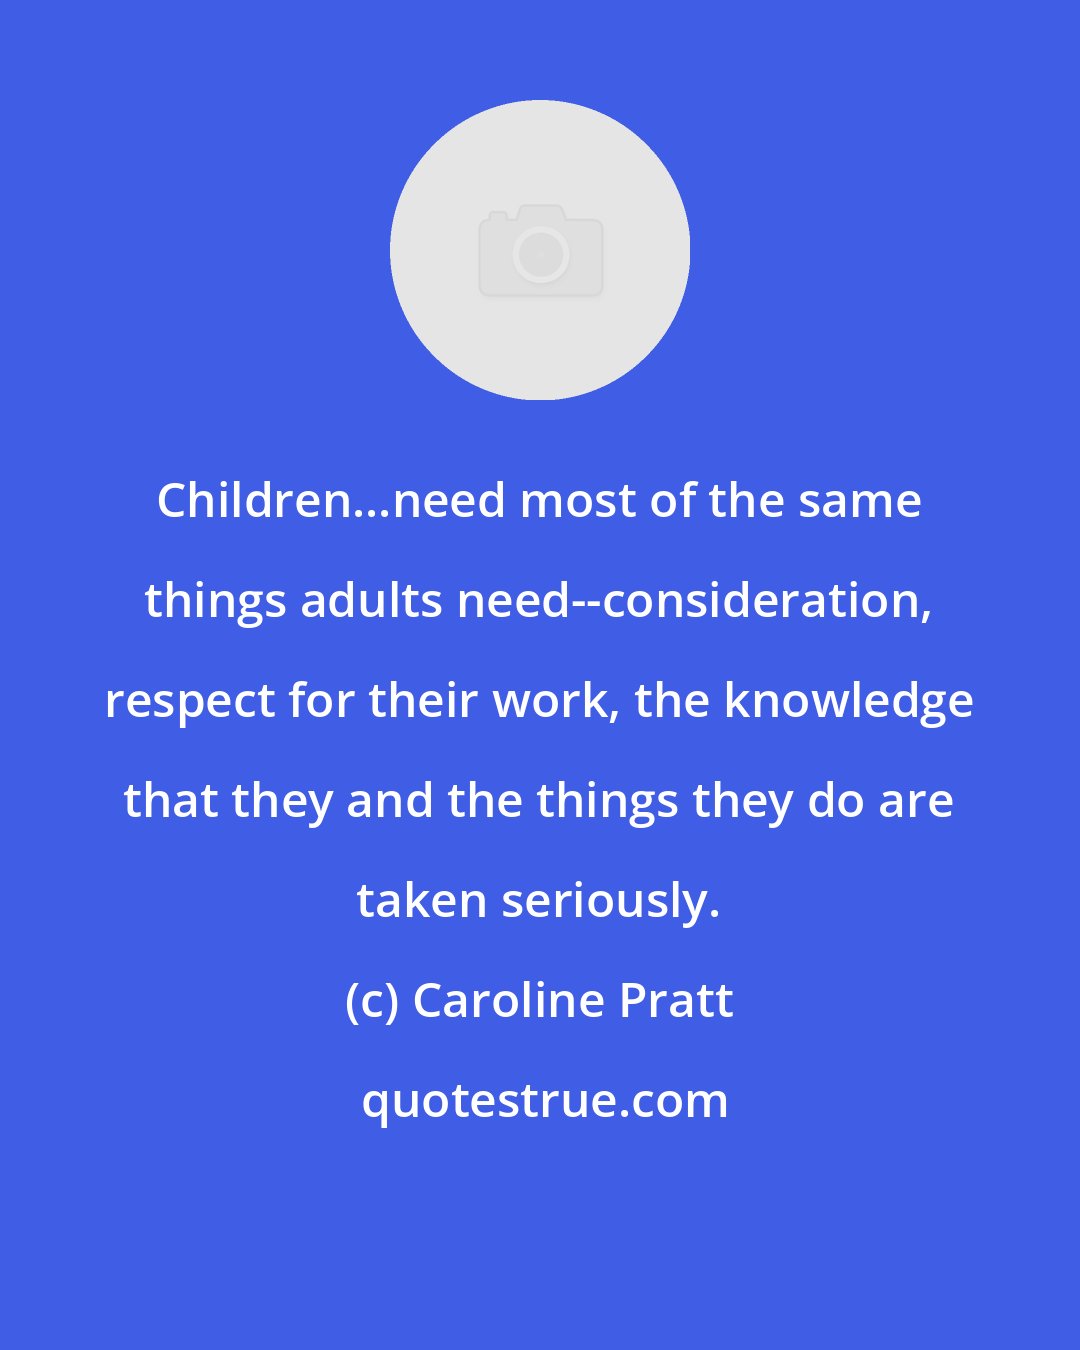 Caroline Pratt: Children...need most of the same things adults need--consideration, respect for their work, the knowledge that they and the things they do are taken seriously.